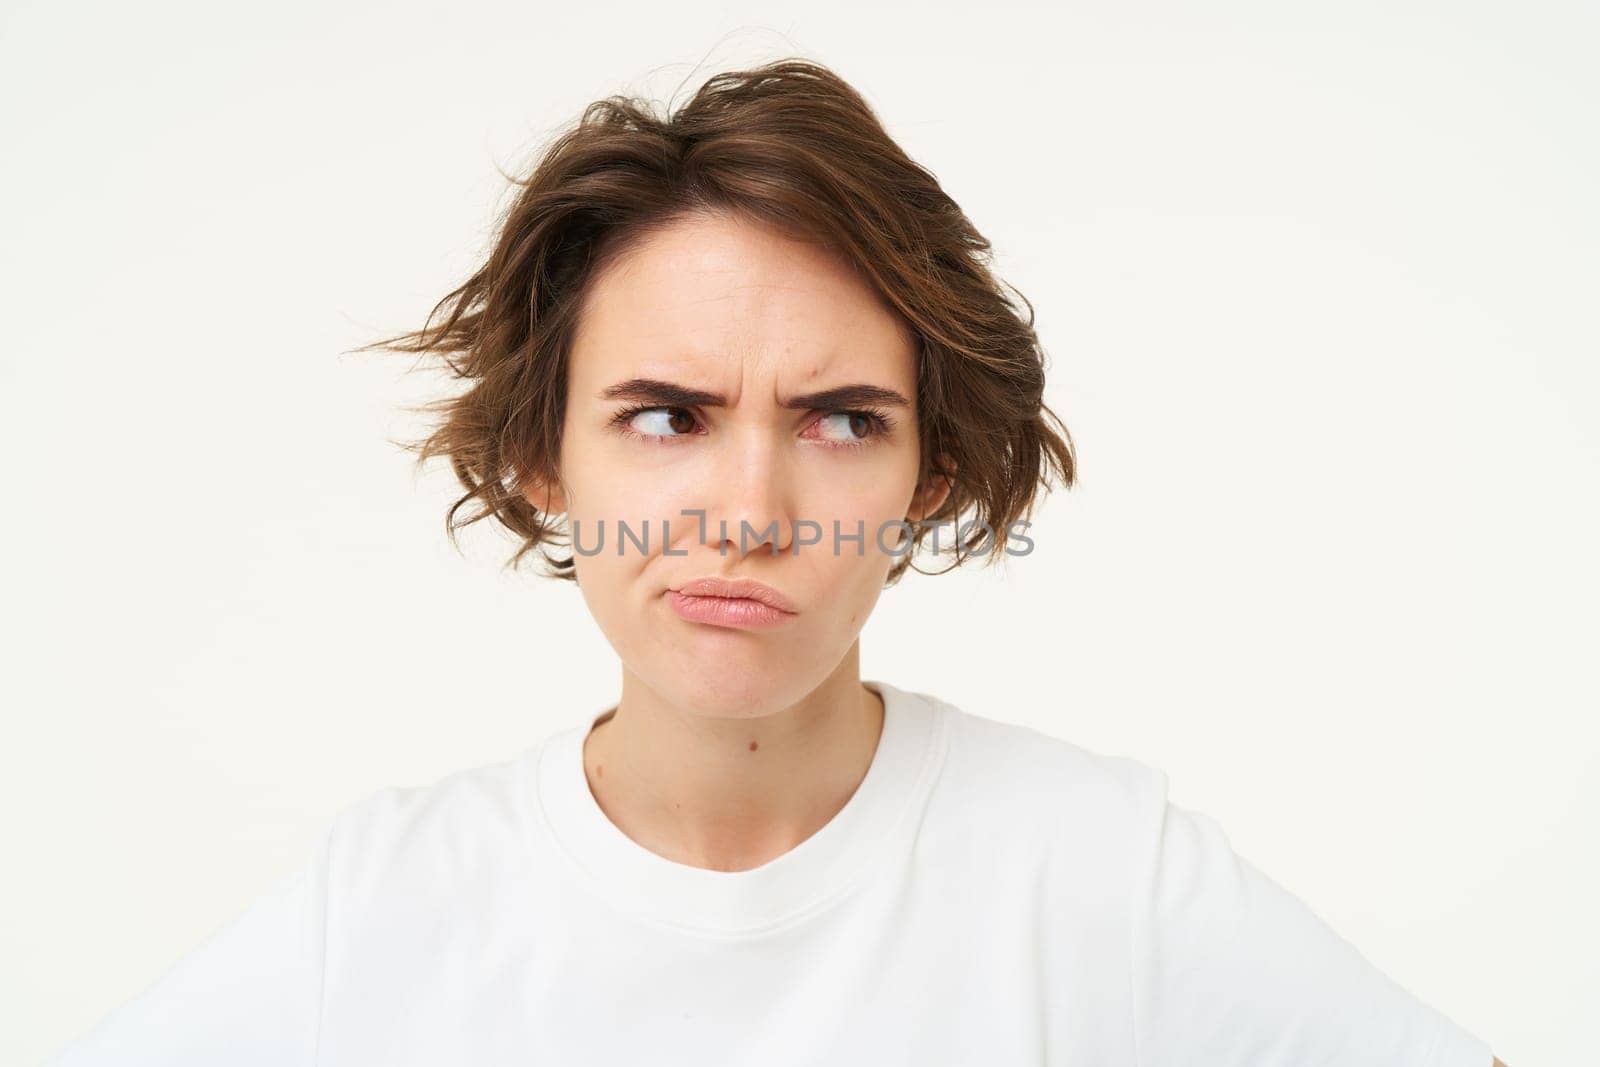 Portrait of frowning, grumpy young woman, looks upset and offended, disappointed by something, standing over white background. Copy space